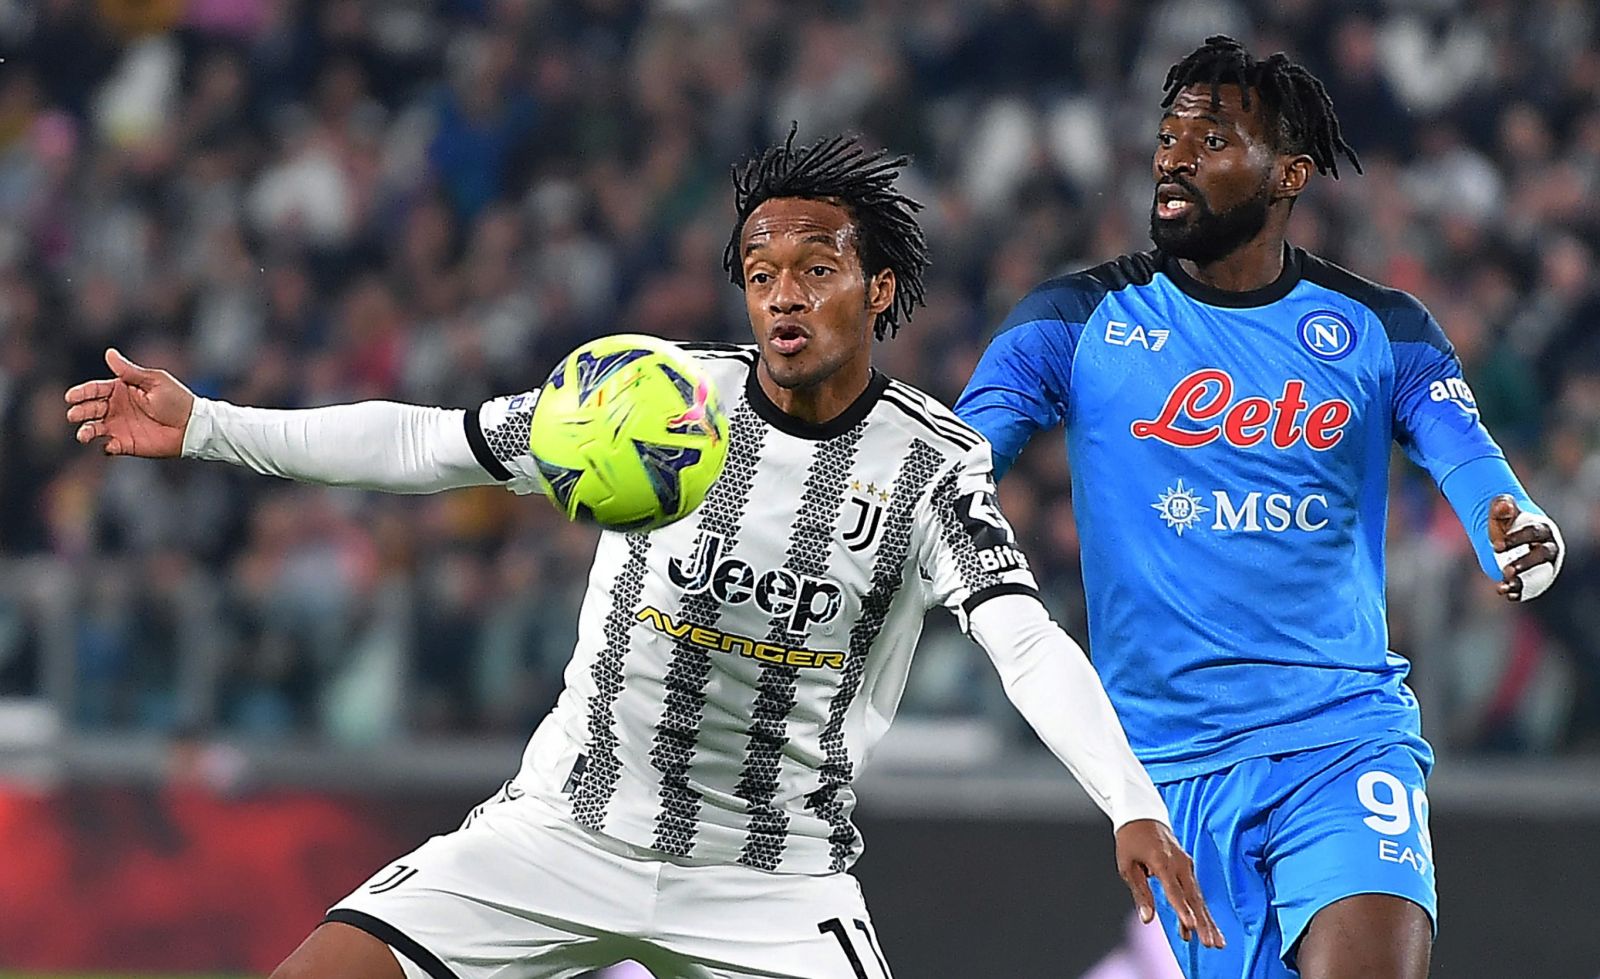 epa10588251 Juventus's Juan Cuadrado (L) and Napoli's Alvaro Ndombele (R) in action during the Italian Serie A soccer match between Juventus FC vs SSC Napoli in Turin, Italy, 23 April 2023.  EPA/Alessandro Di Marco